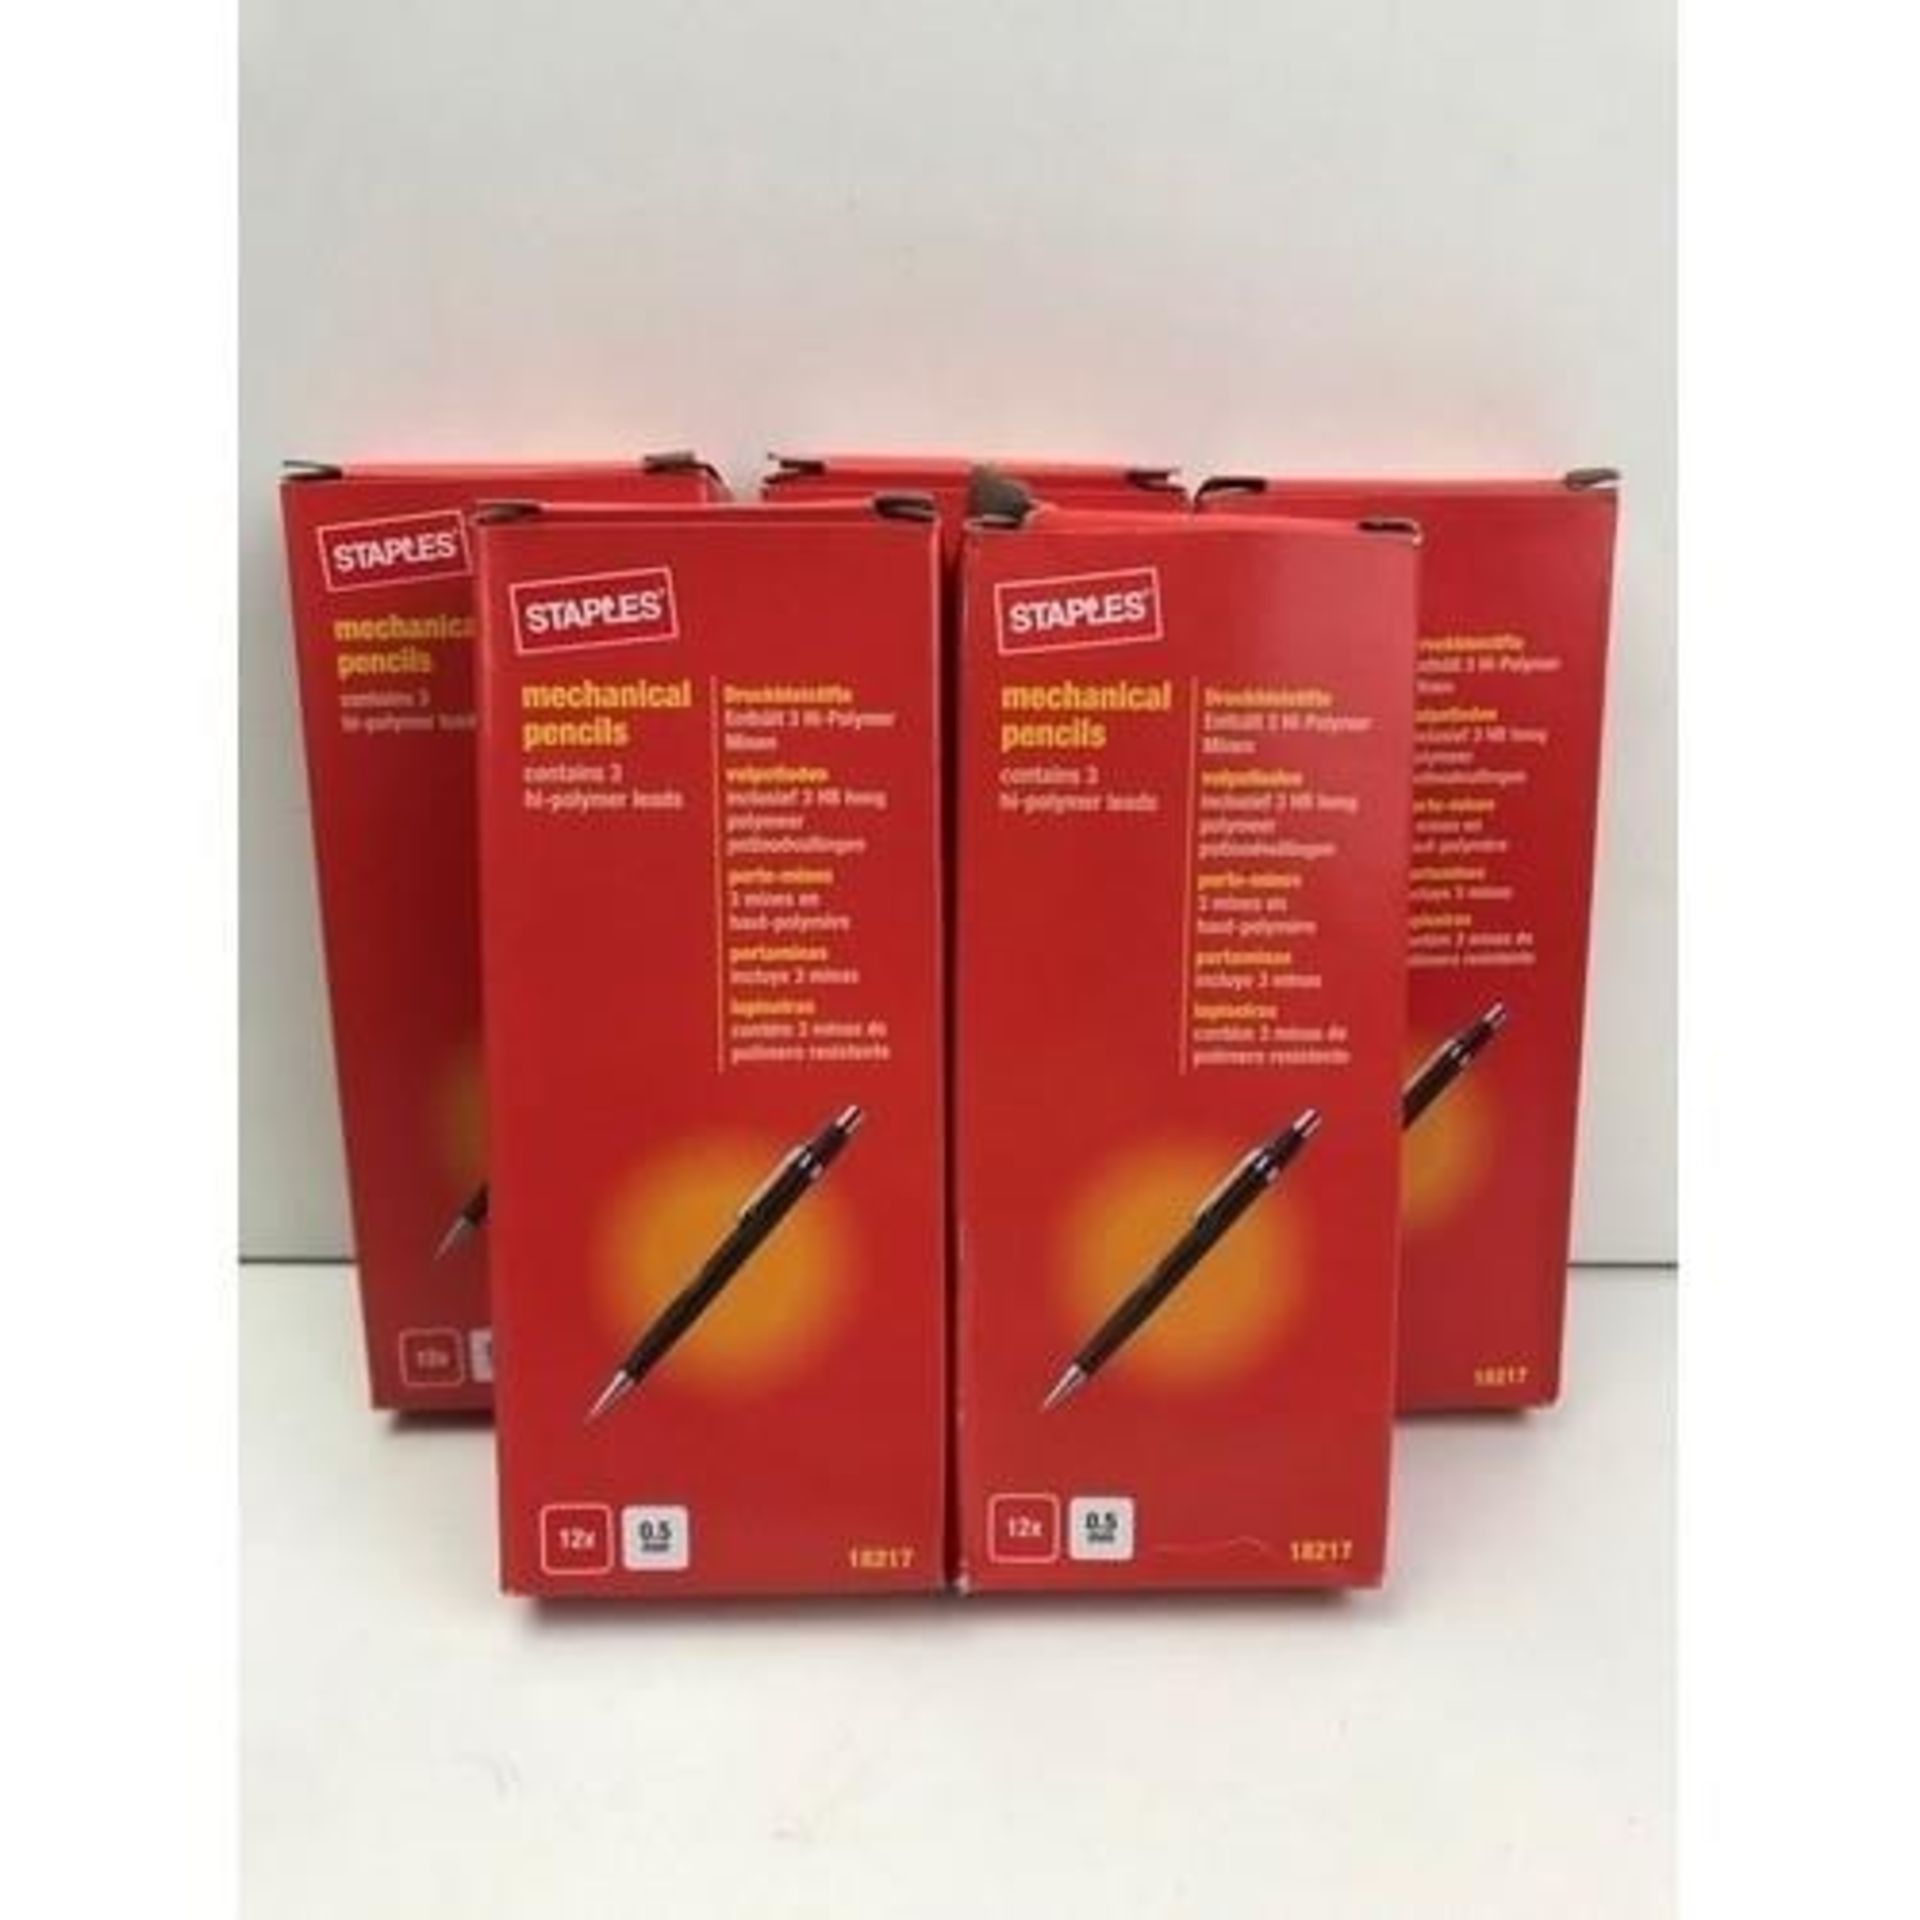 GRADE A- X5 BRAND NEW BOXED STAPLES MECHANICAL PENCILS, EACH BOX CONTAINS 12 PENCILS,RRP-£9.